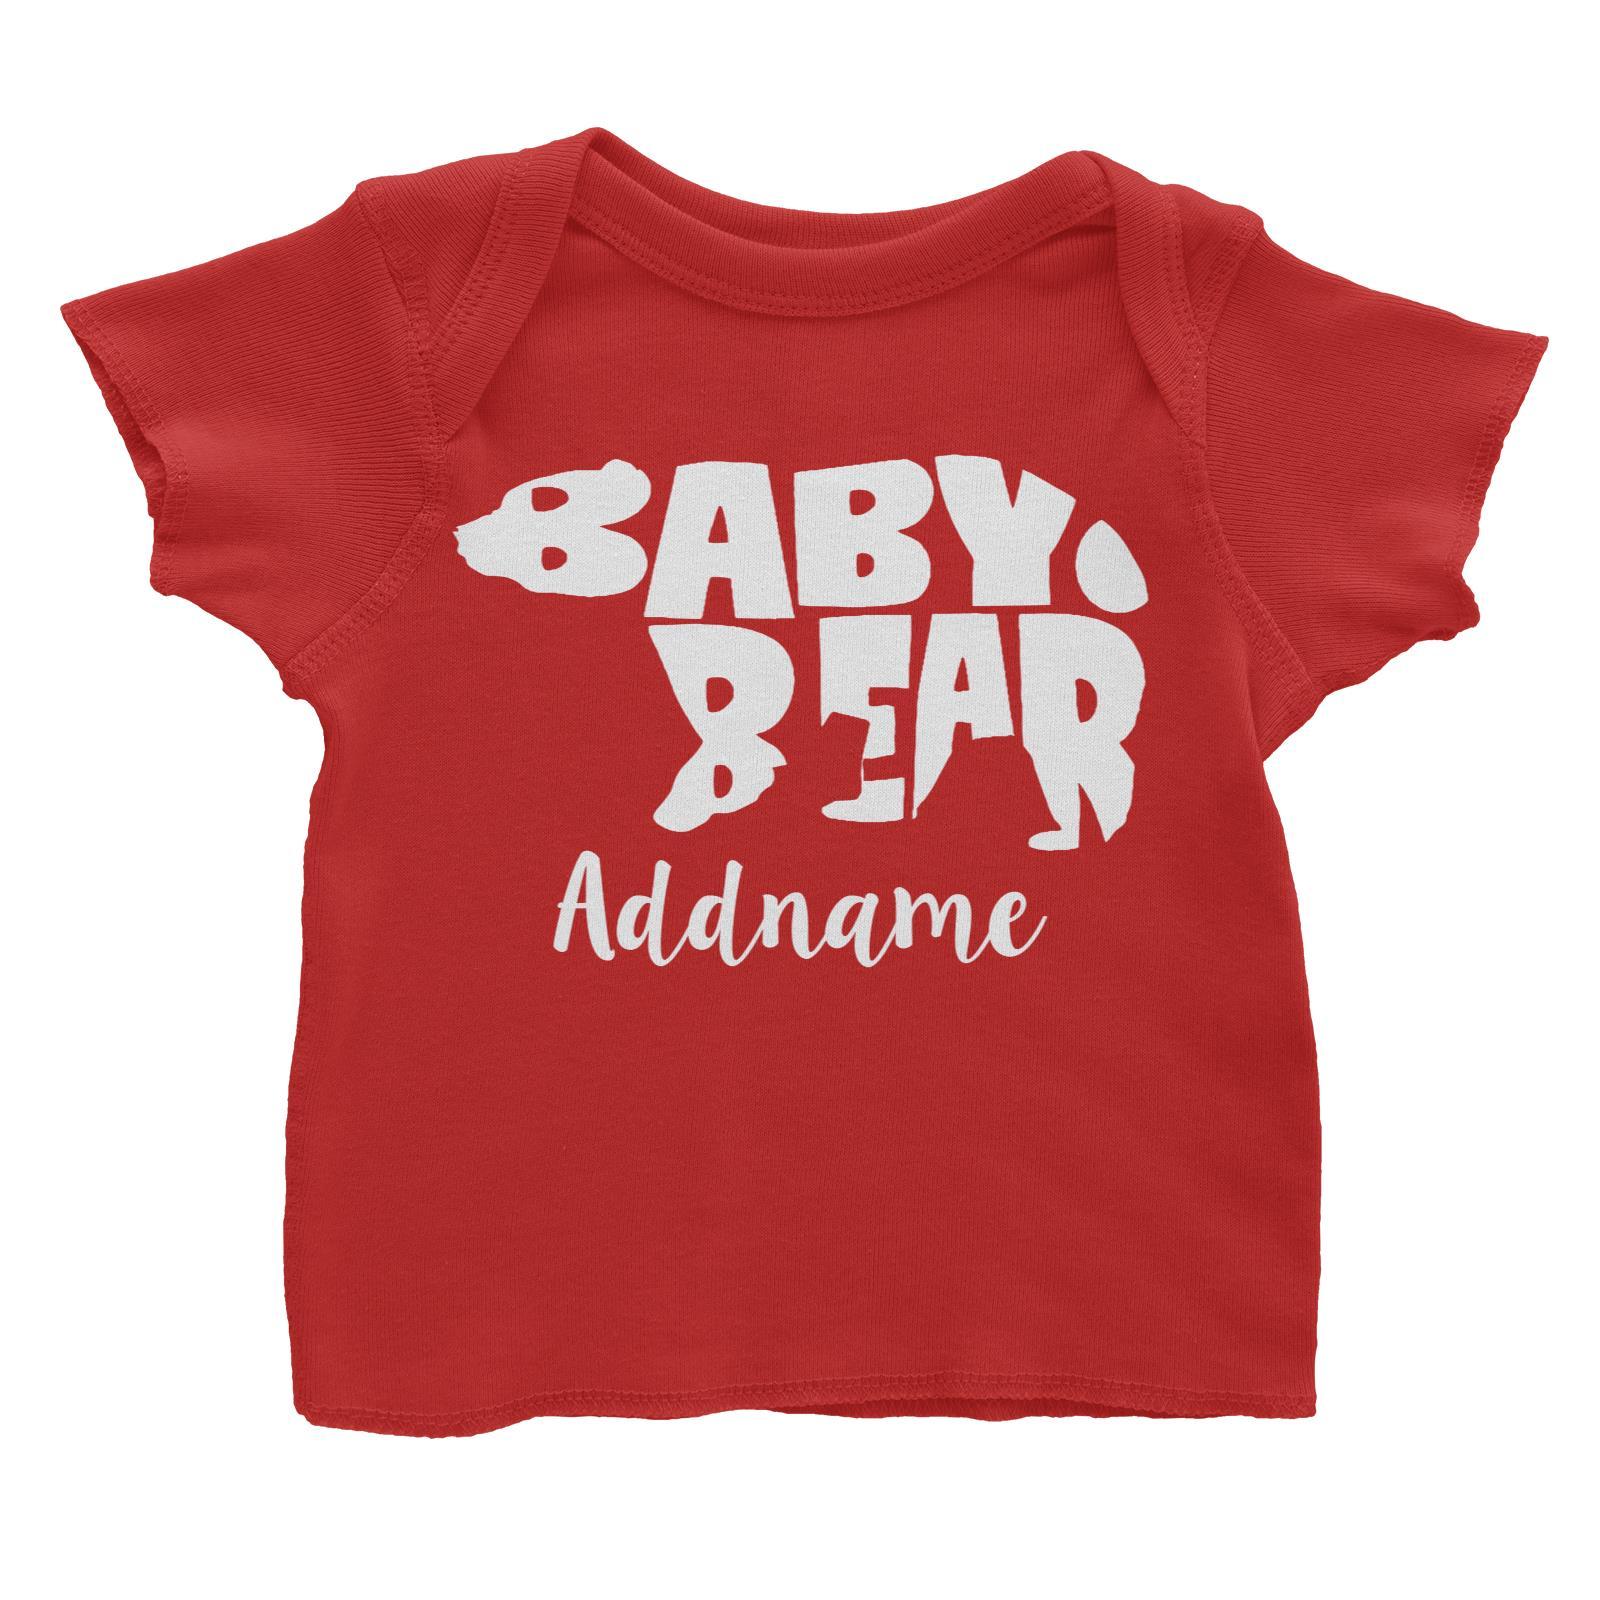 Baby Bear Silhouette Addname Baby T-Shirt